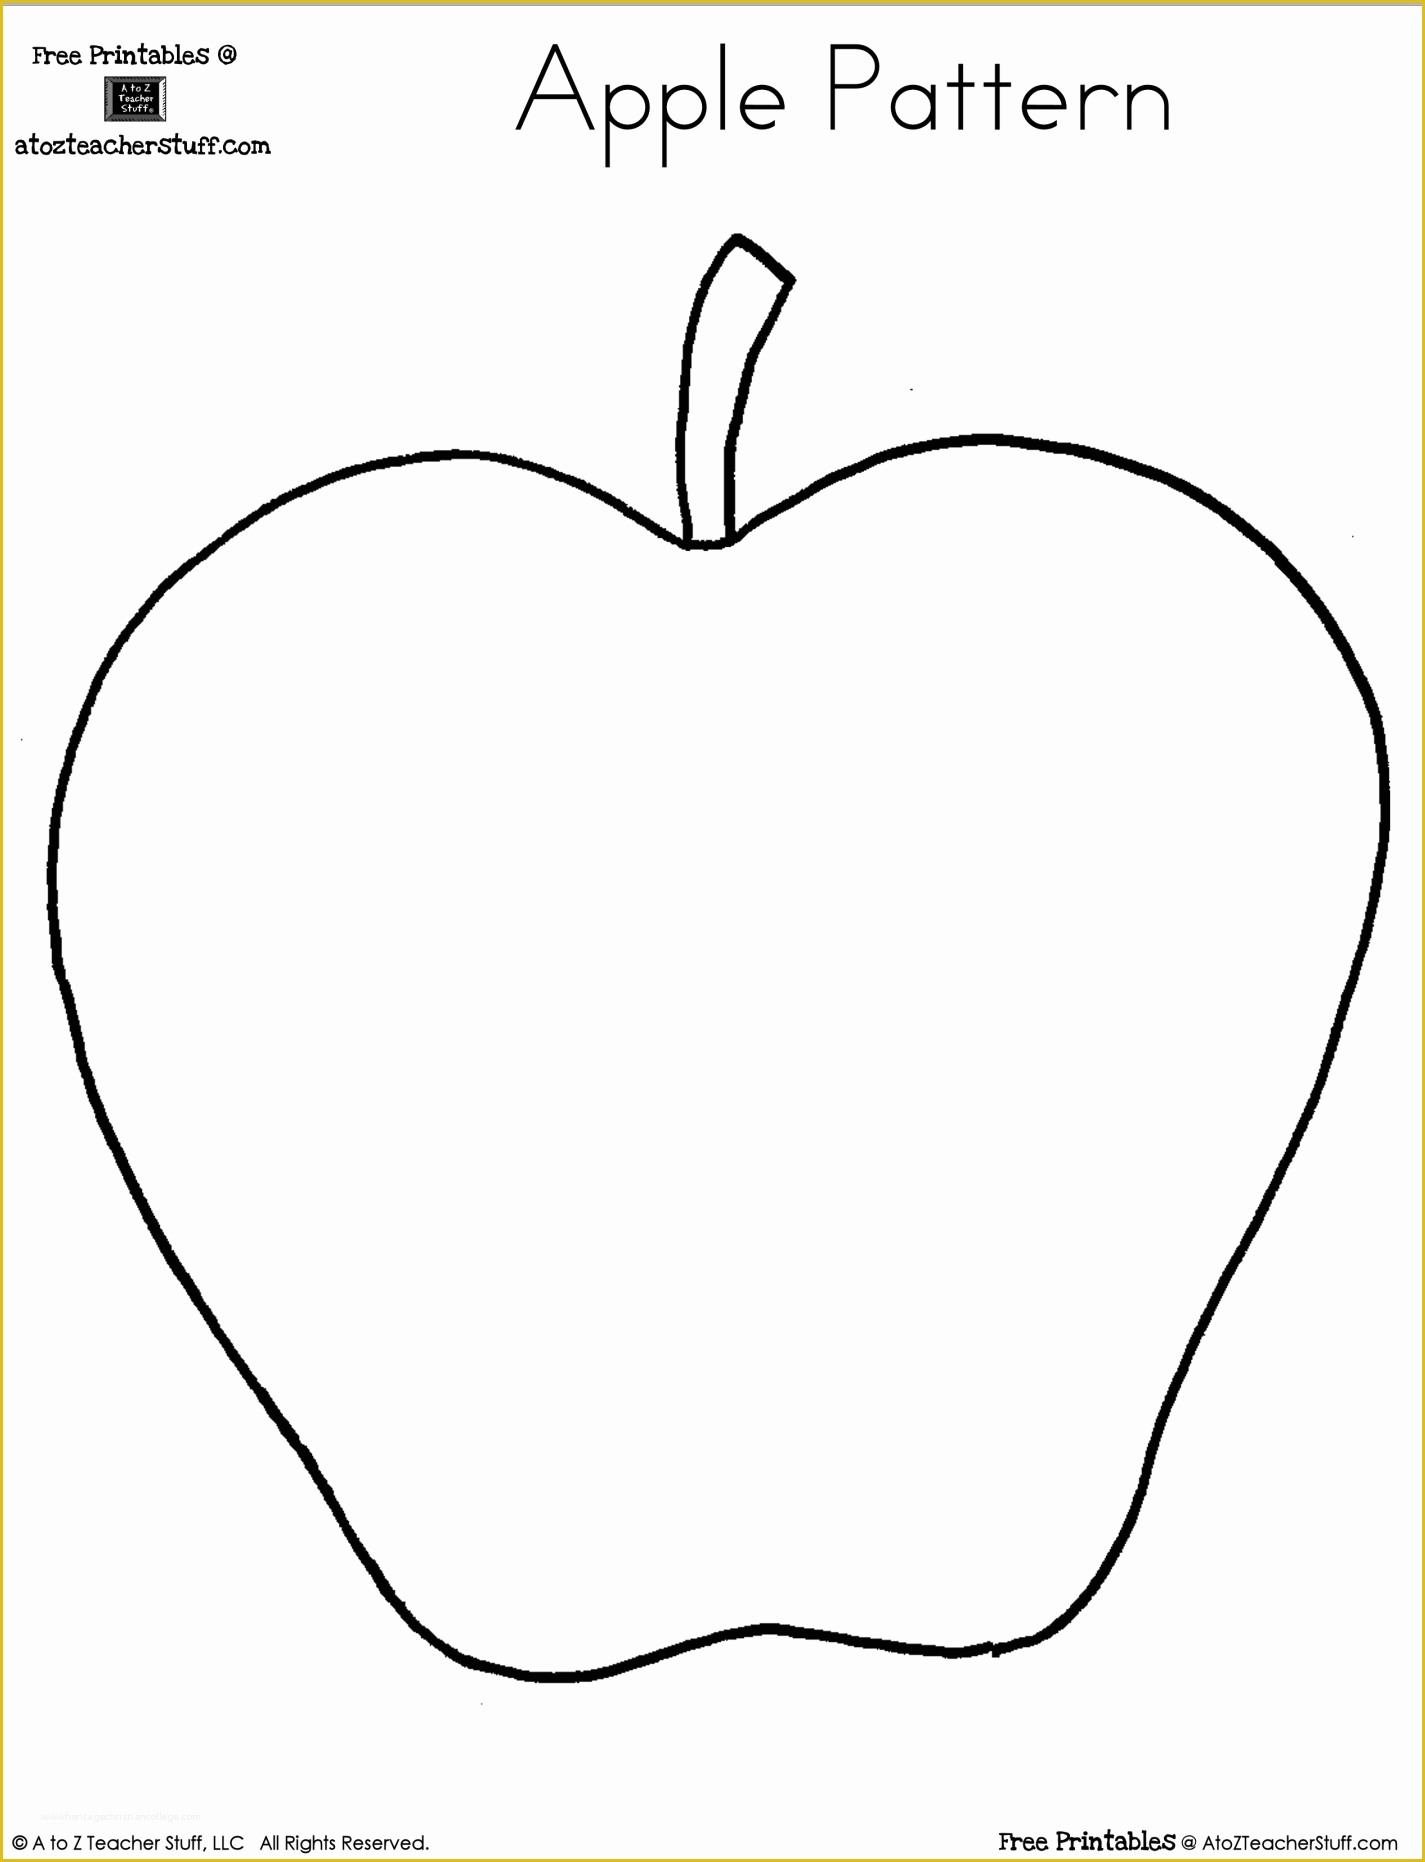 Free Apple Pages Templates Of Blank Apple Writing Page or Shape Book Free Printable